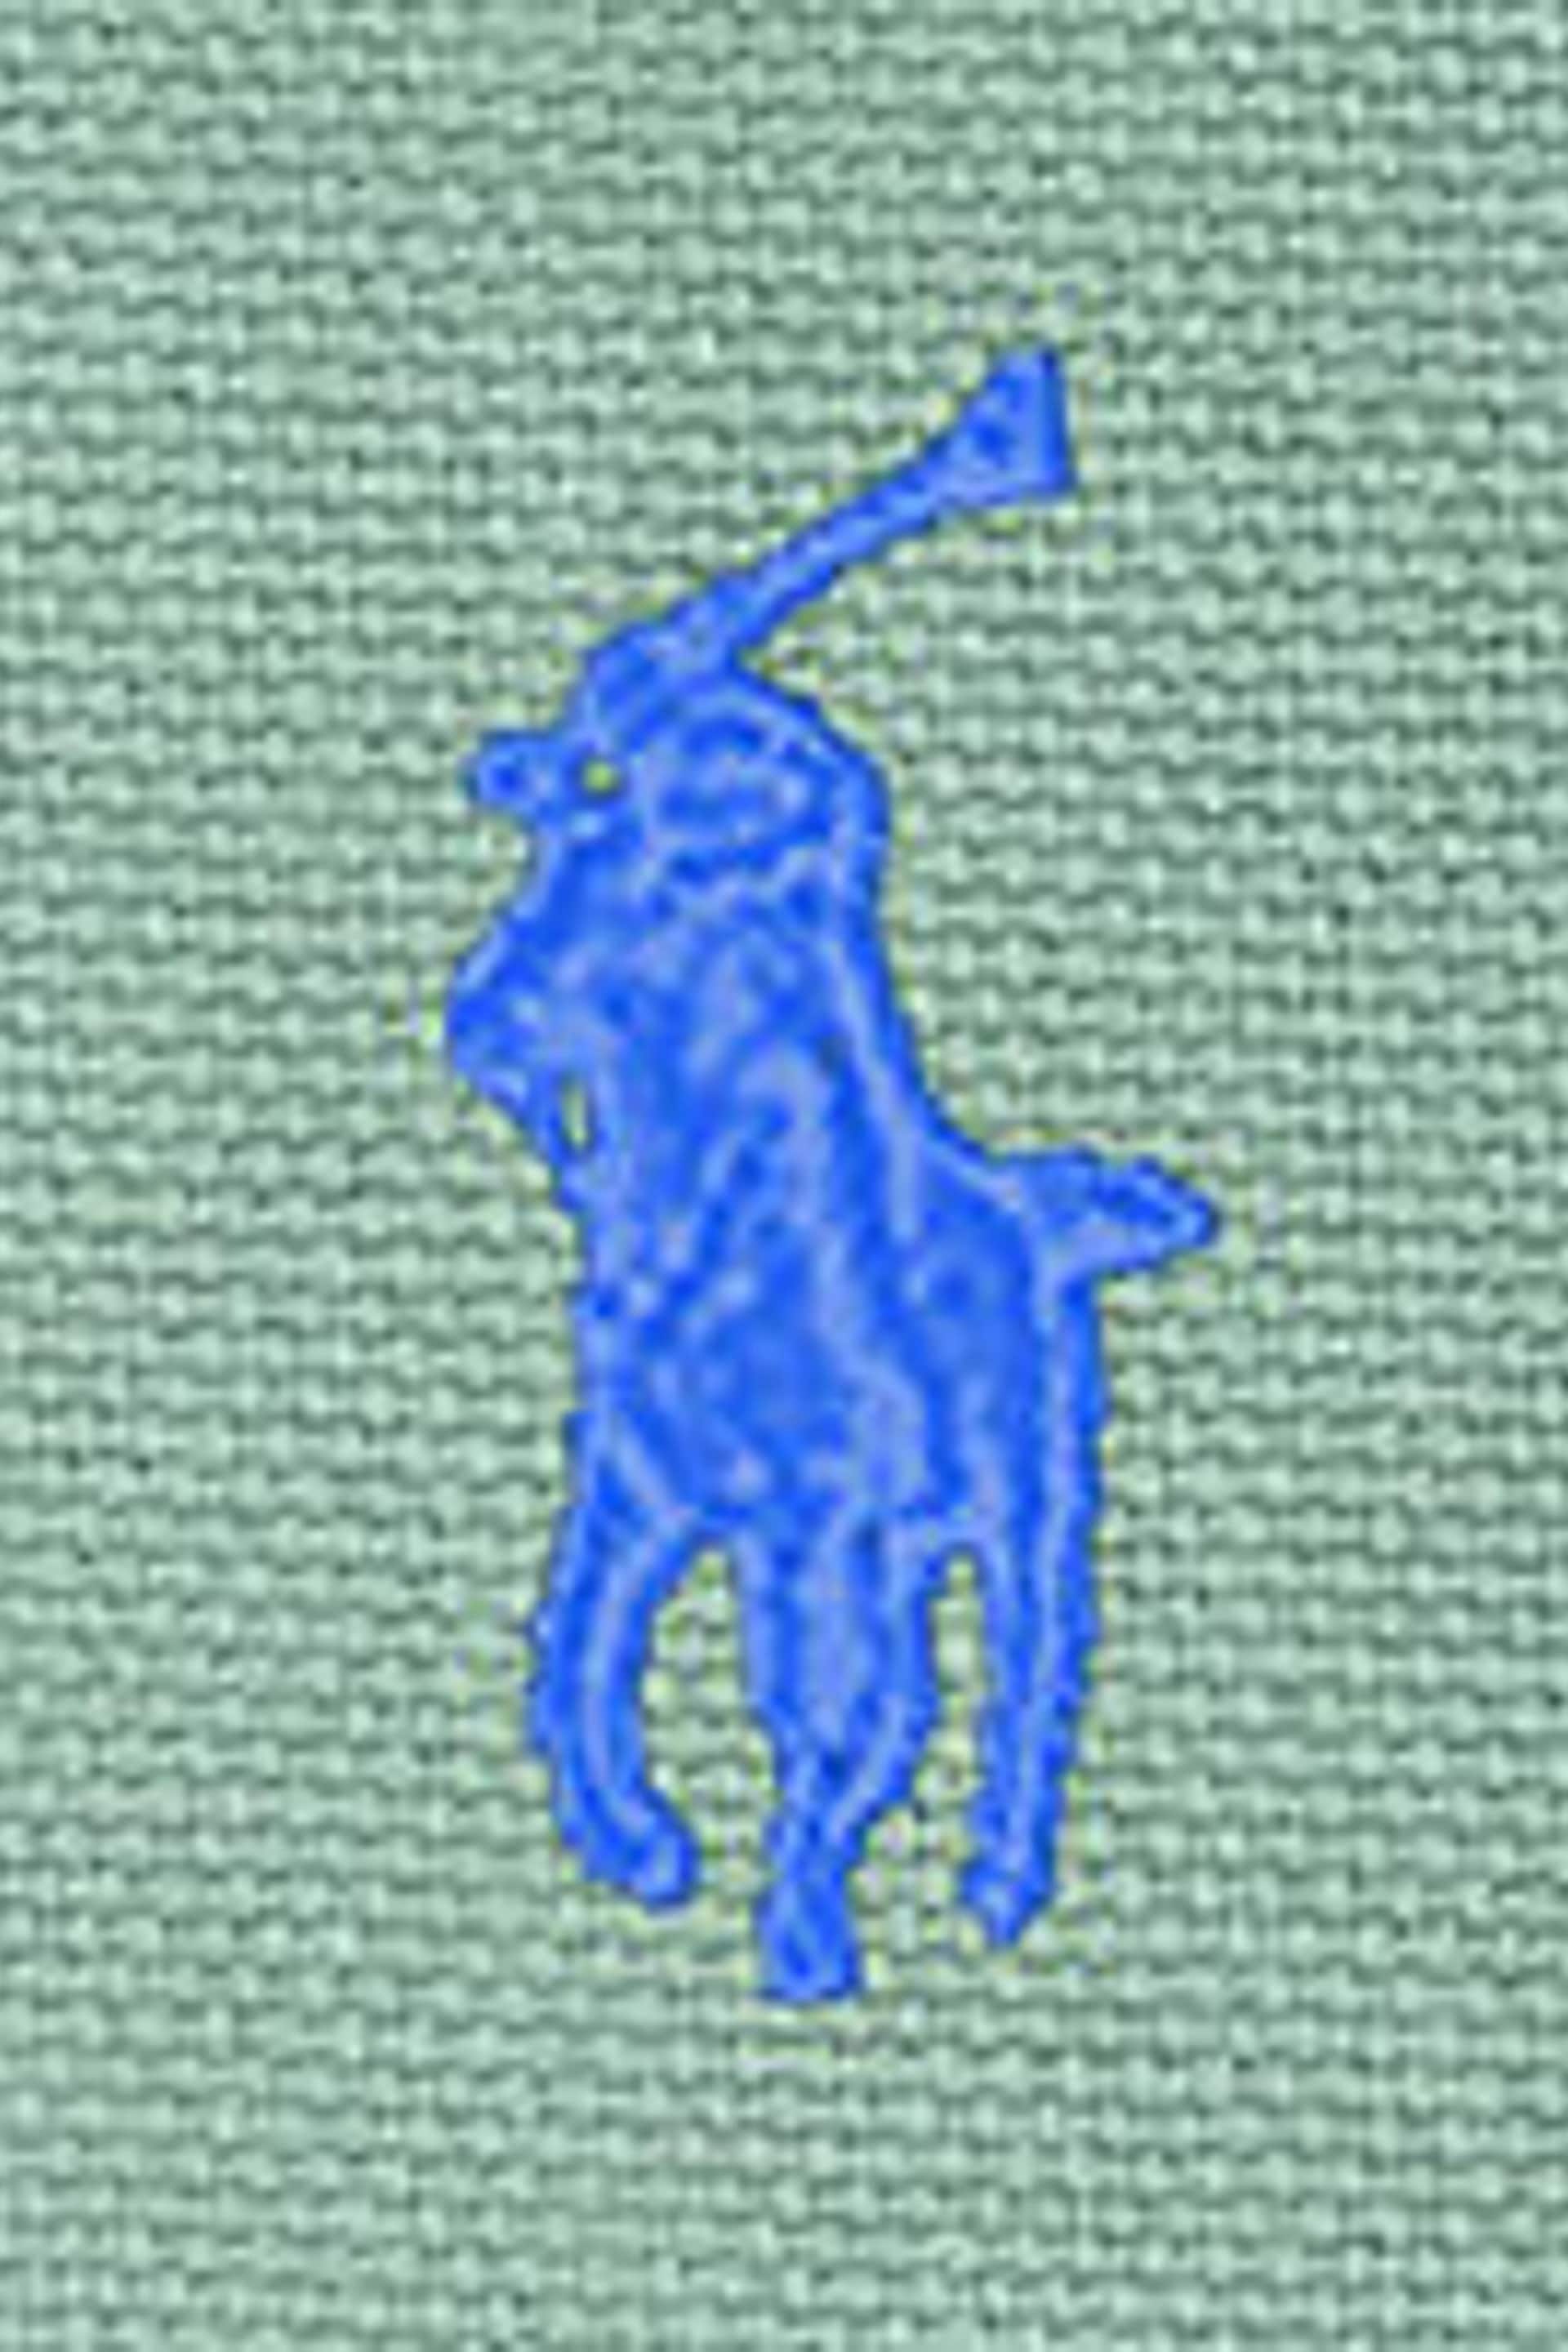 Polo Ralph Lauren Canvas Backpack - Image 6 of 7